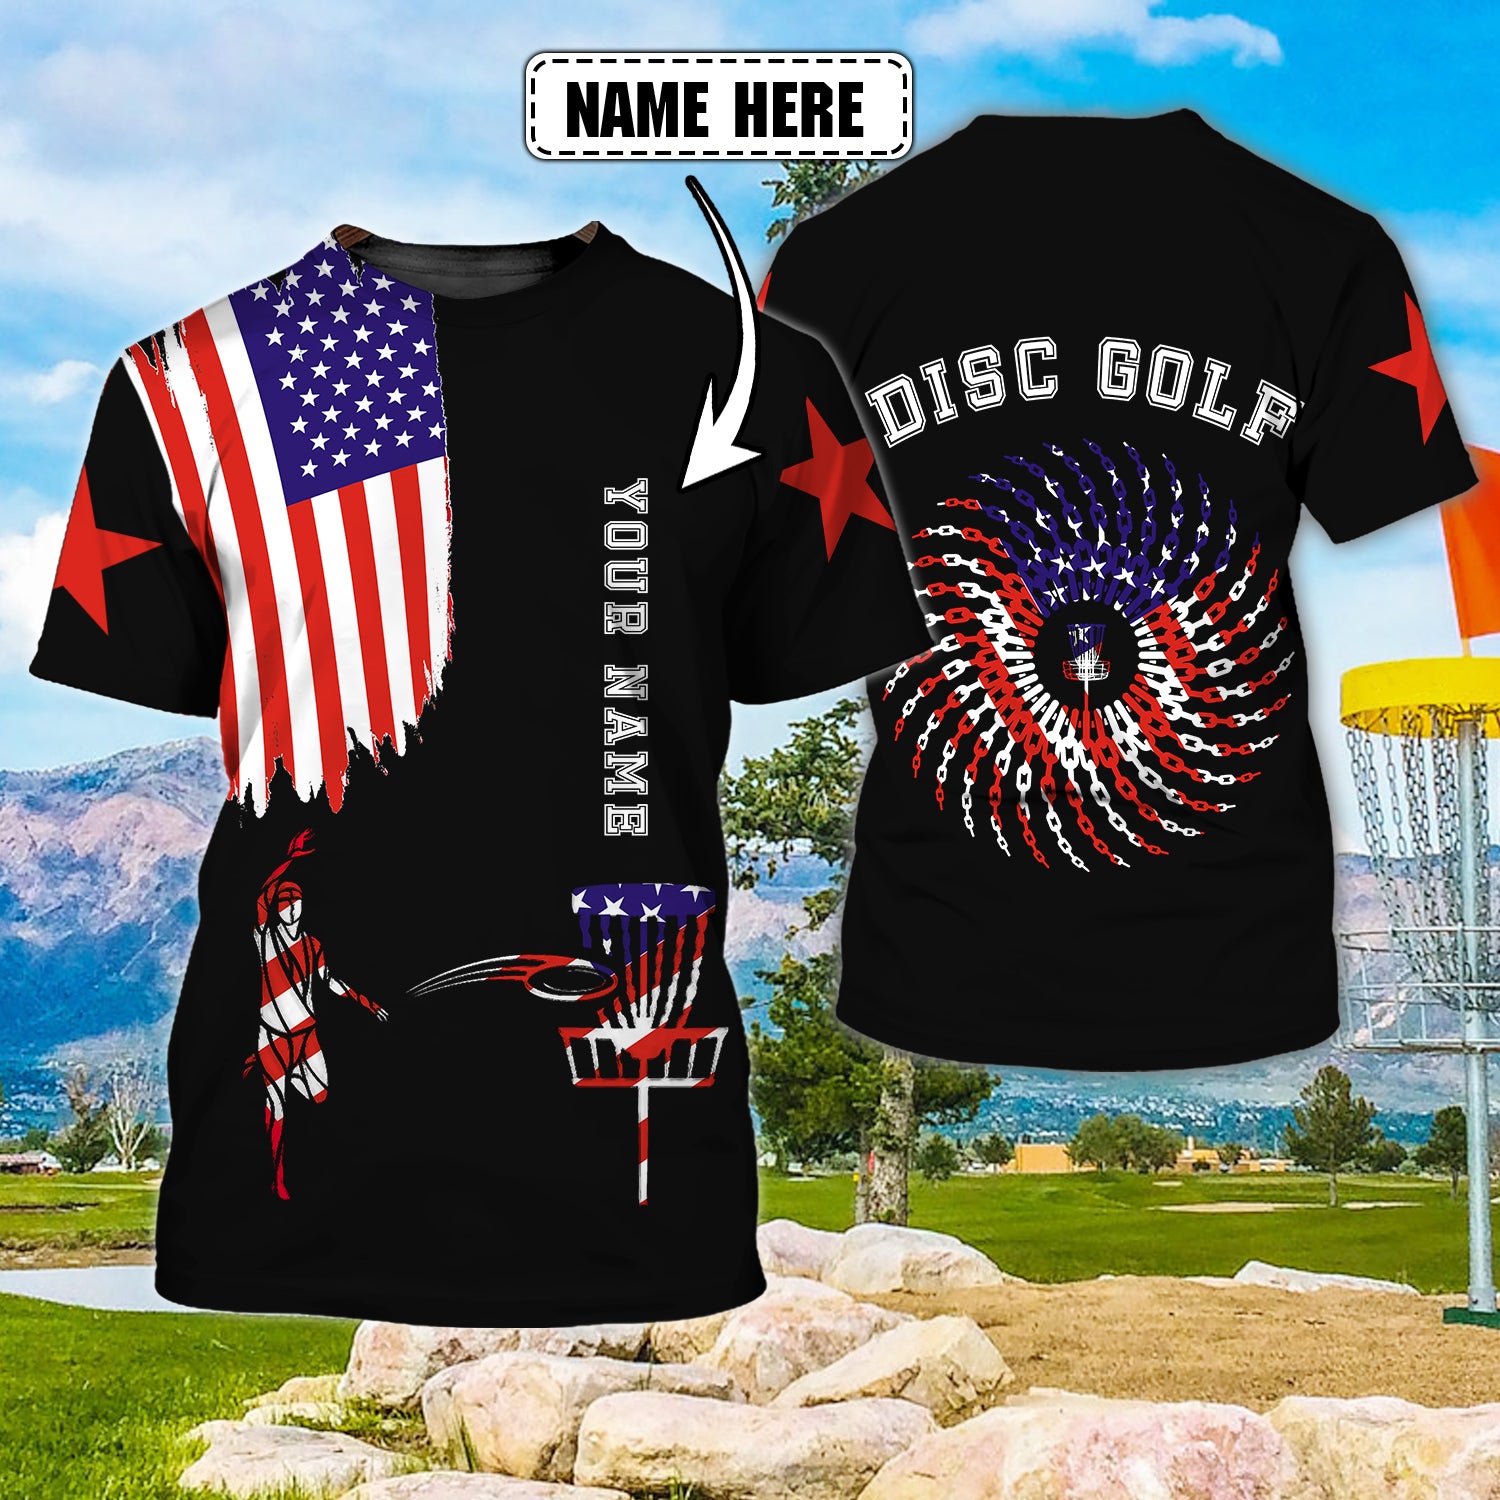 Disc Golf - Personalized Name 3D Tshirt - Nmd 52 (Only Sale Today)